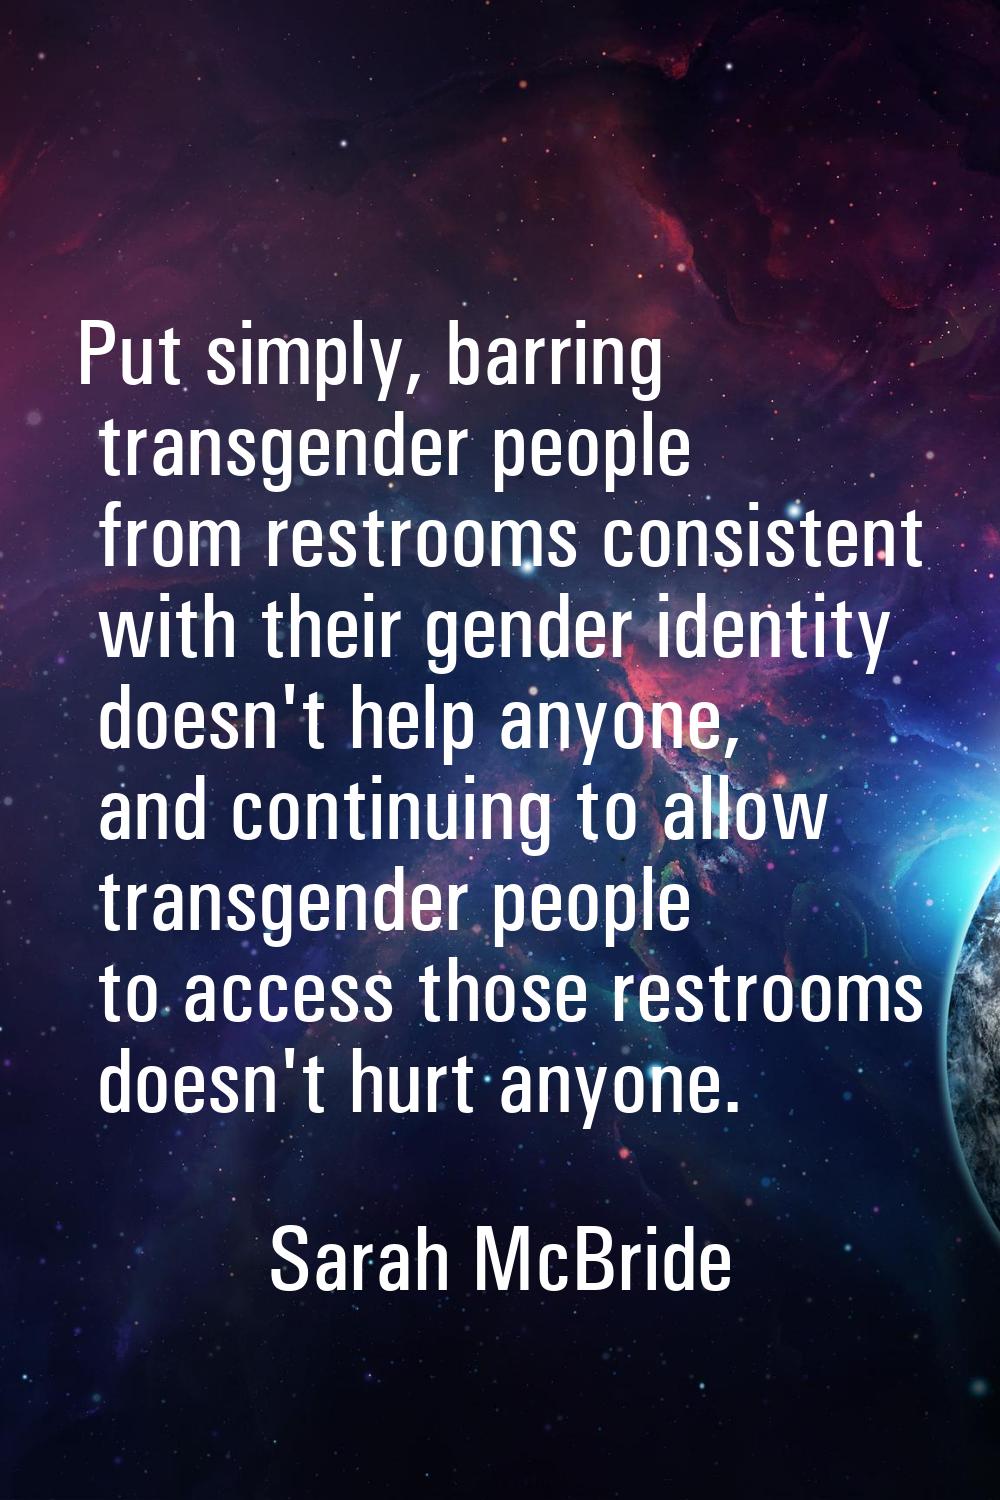 Put simply, barring transgender people from restrooms consistent with their gender identity doesn't